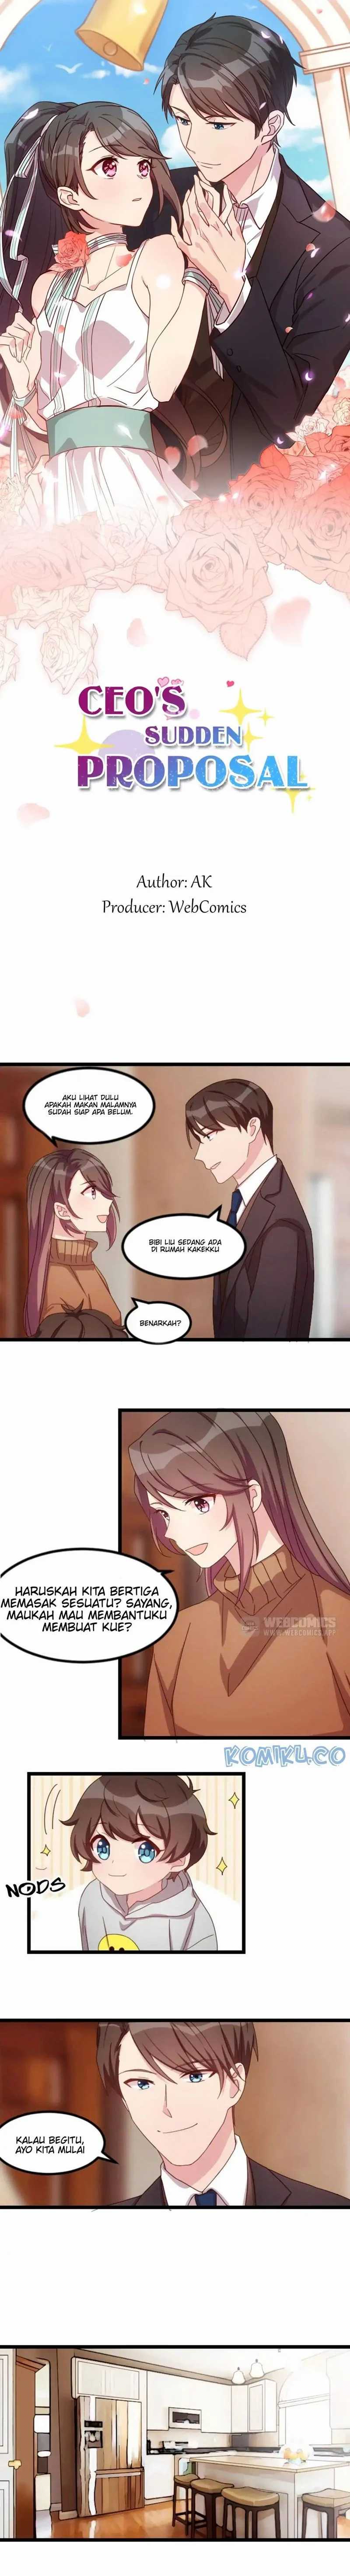 CEO’s Sudden Proposal Chapter 65